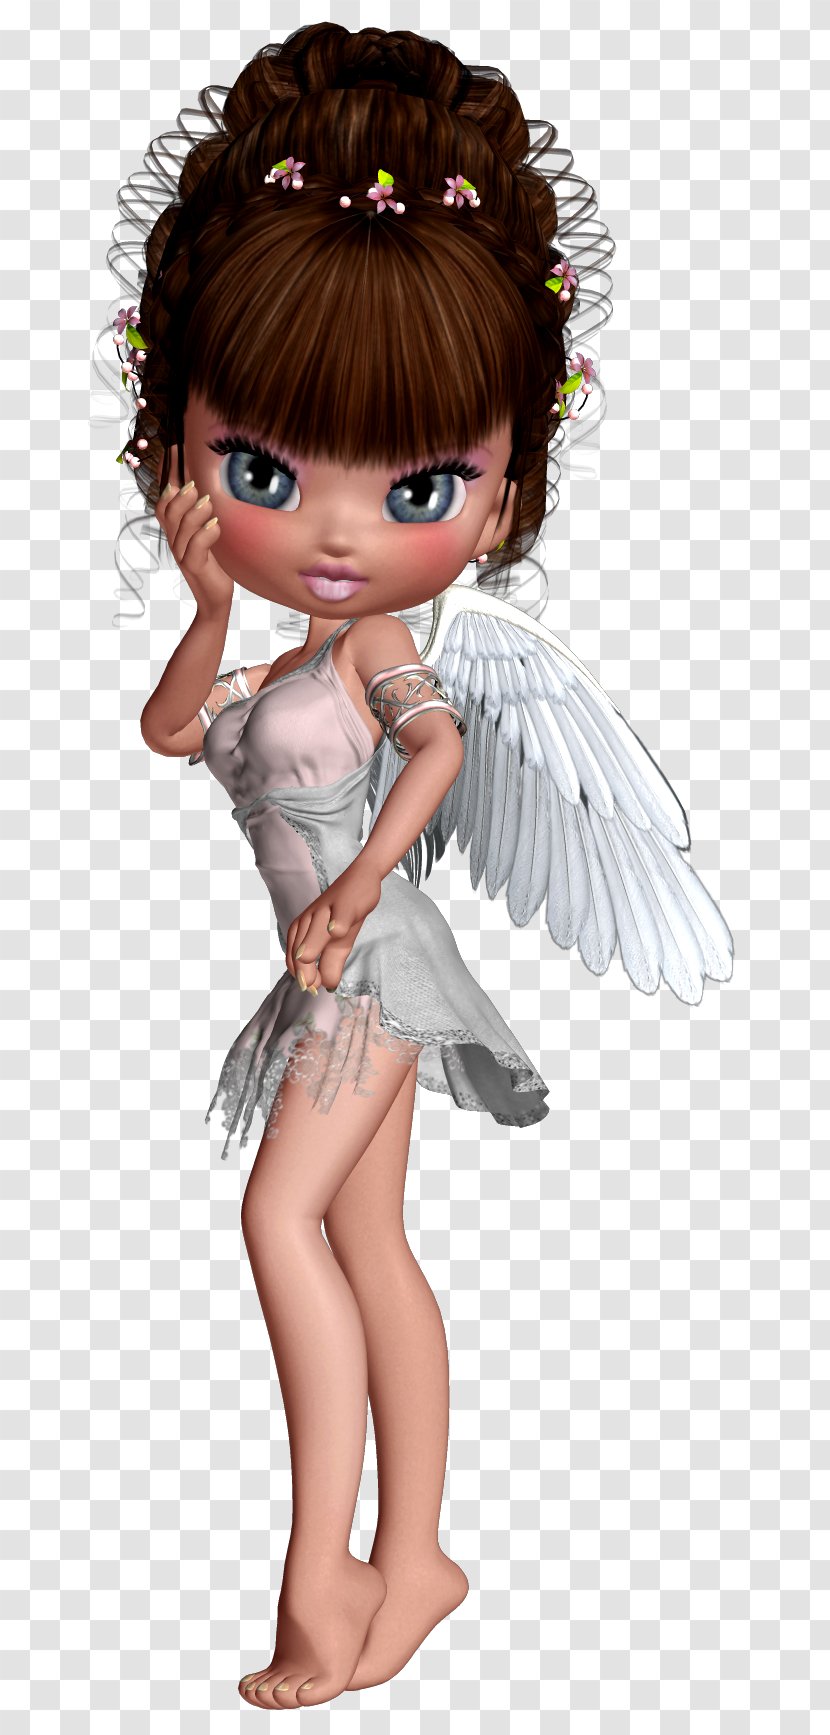 3D Computer Graphics Cartoon Angel Animation Modeling - Tree - Cute Little Clipart Transparent PNG